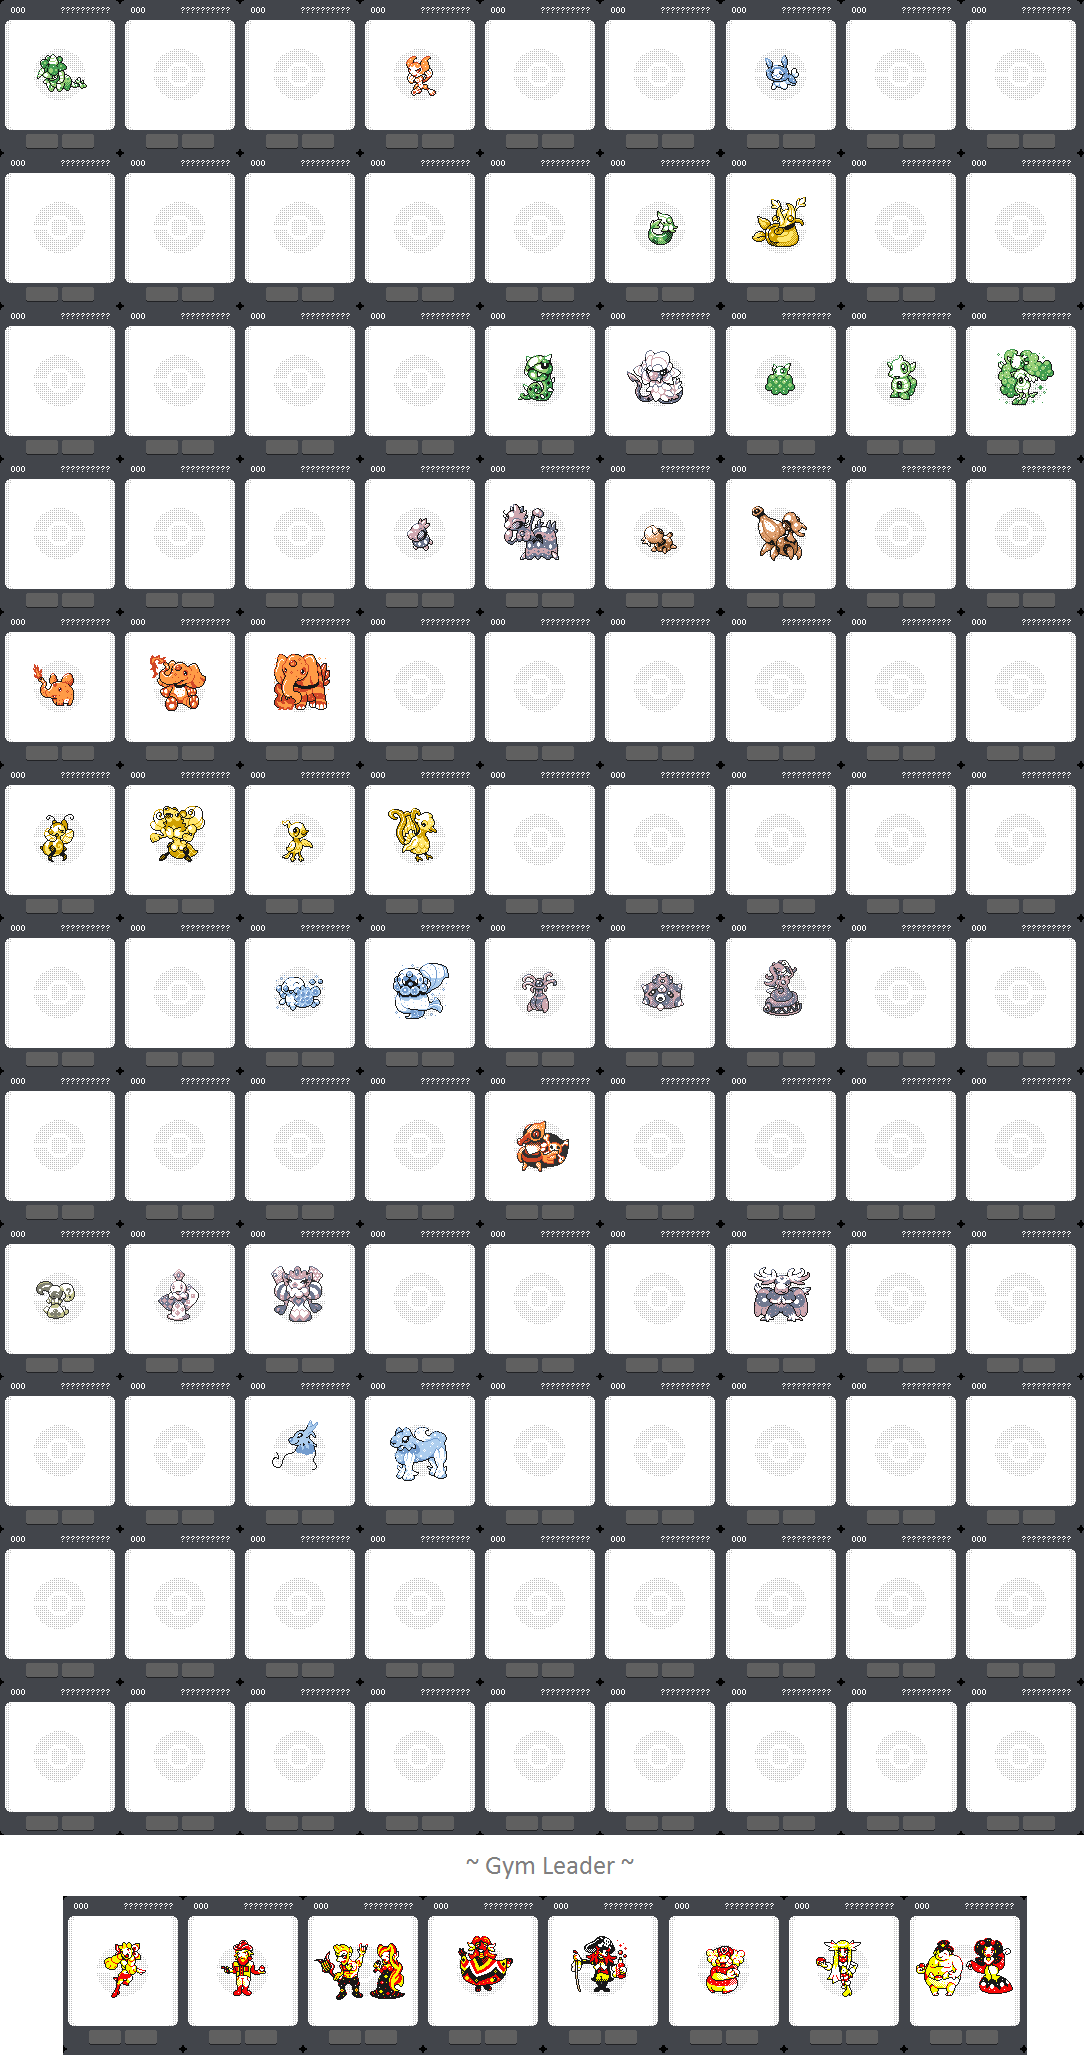 region_pokedex_rby_style_by_fenne_king-d6hfdaf.png